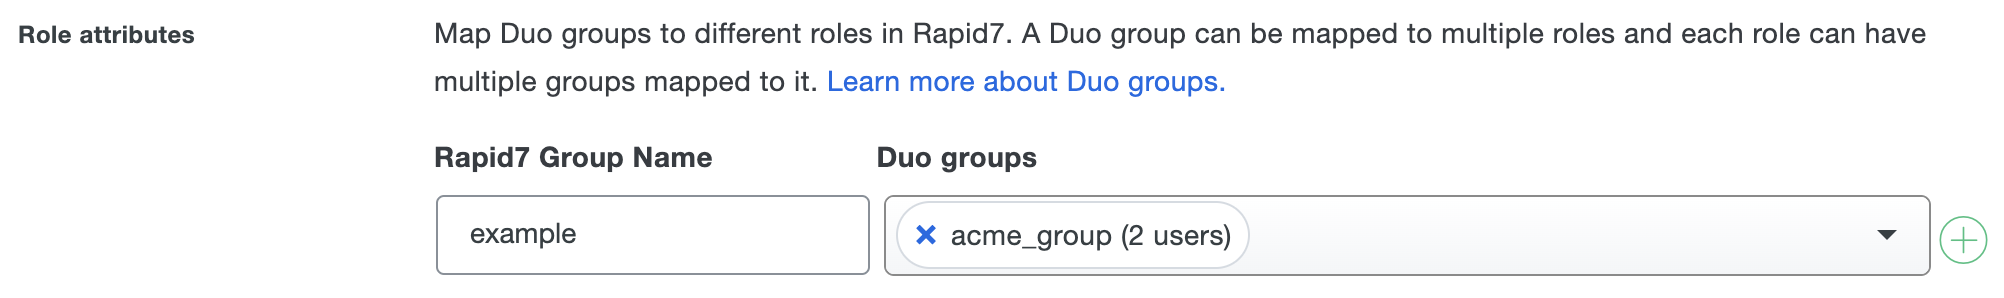 Duo Rapid7 Group Mapping